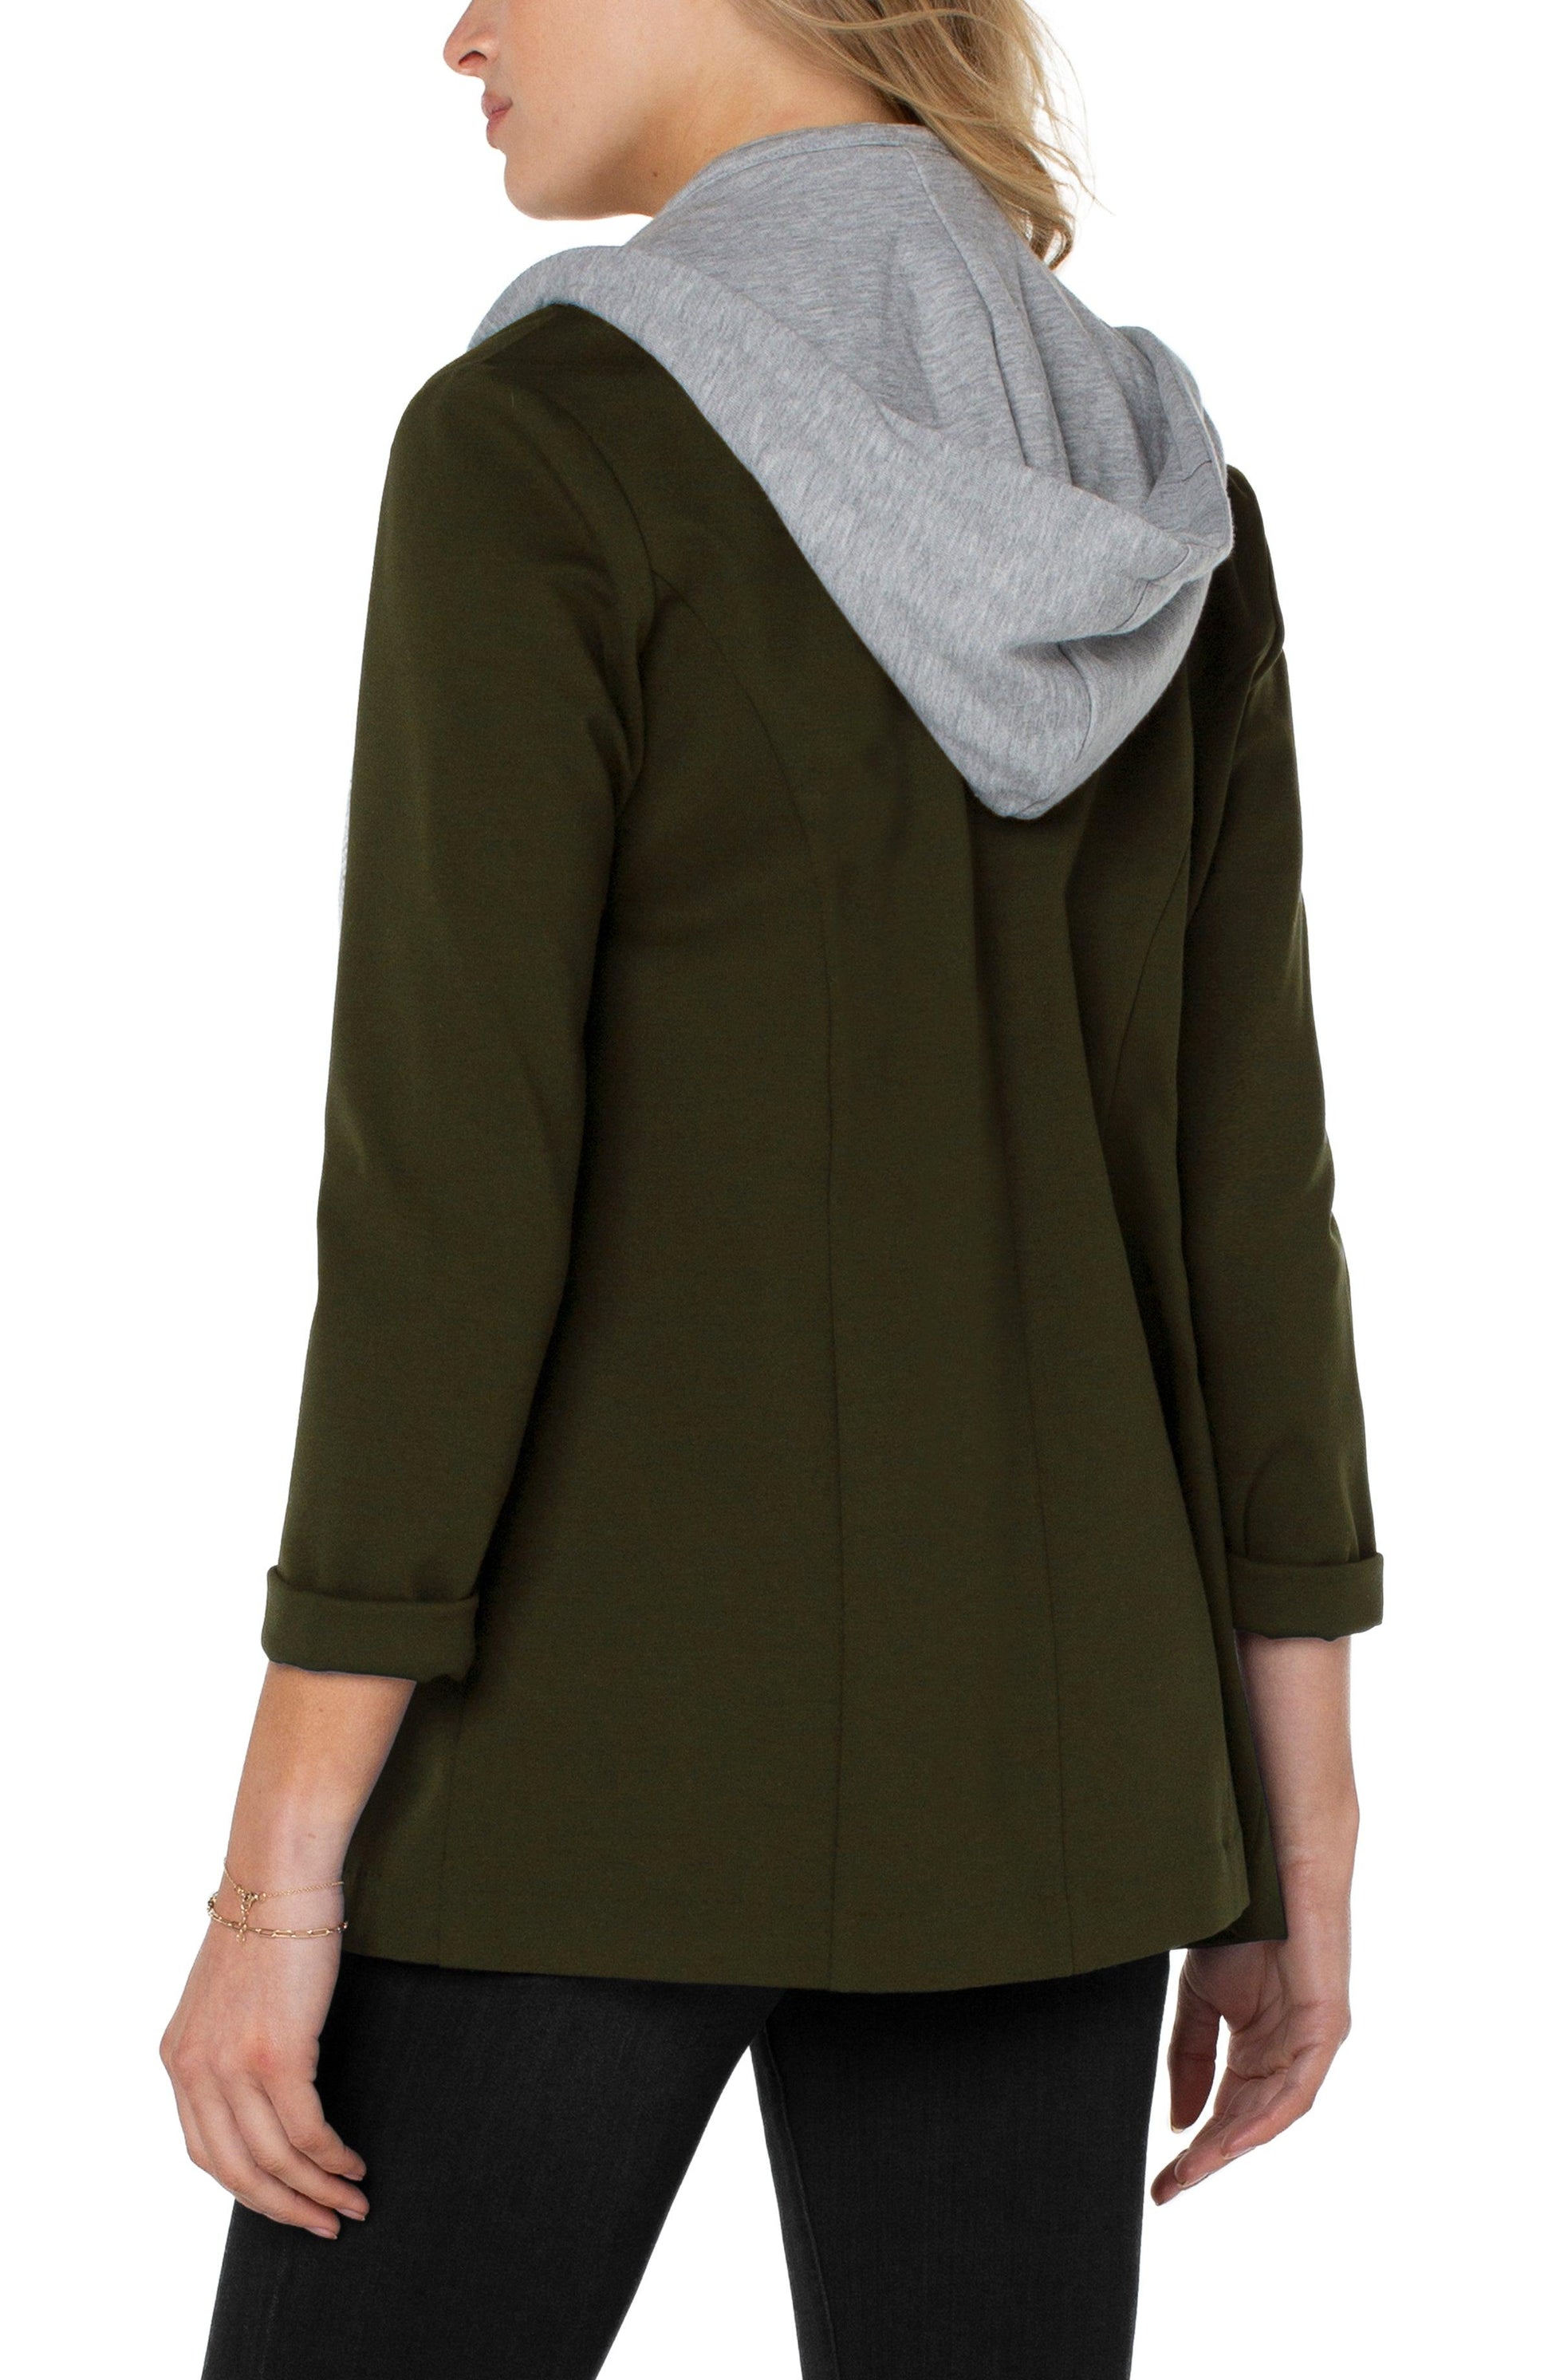 Liverpool Olive Blazer with Removable Hood - Strawberry Moon Boutique